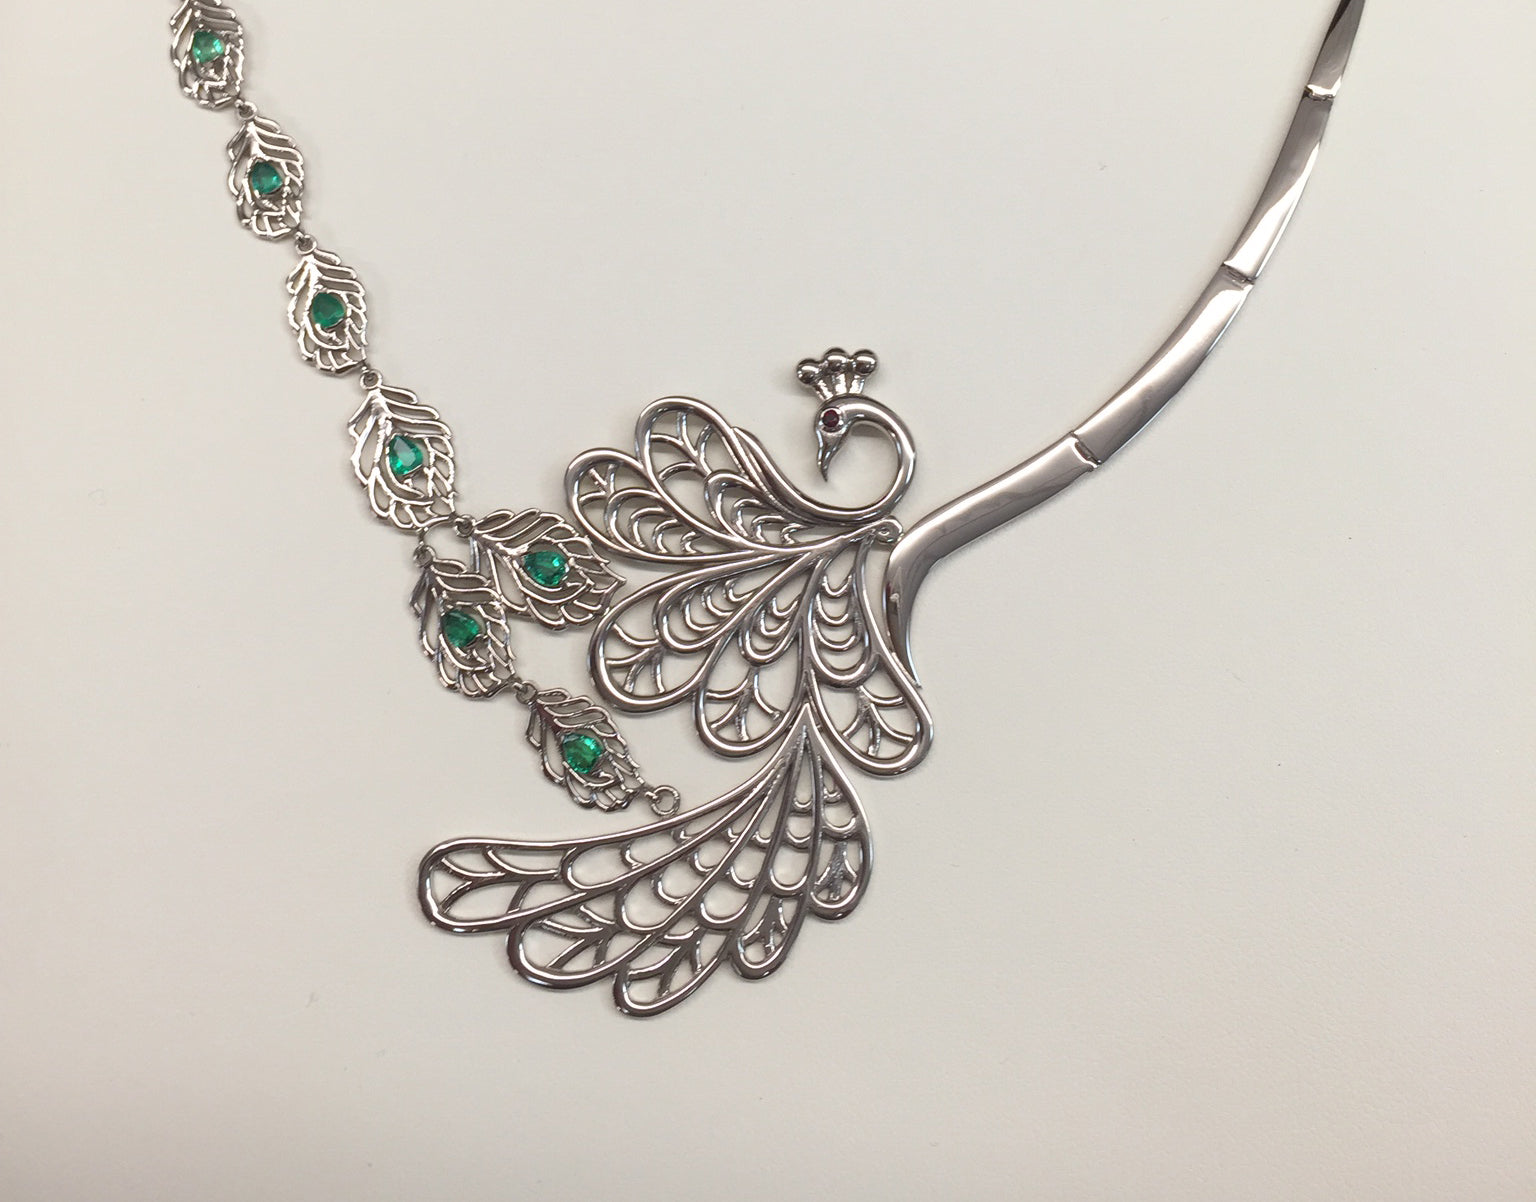 Bespoke White Gold Peacock Necklace with Emeralds